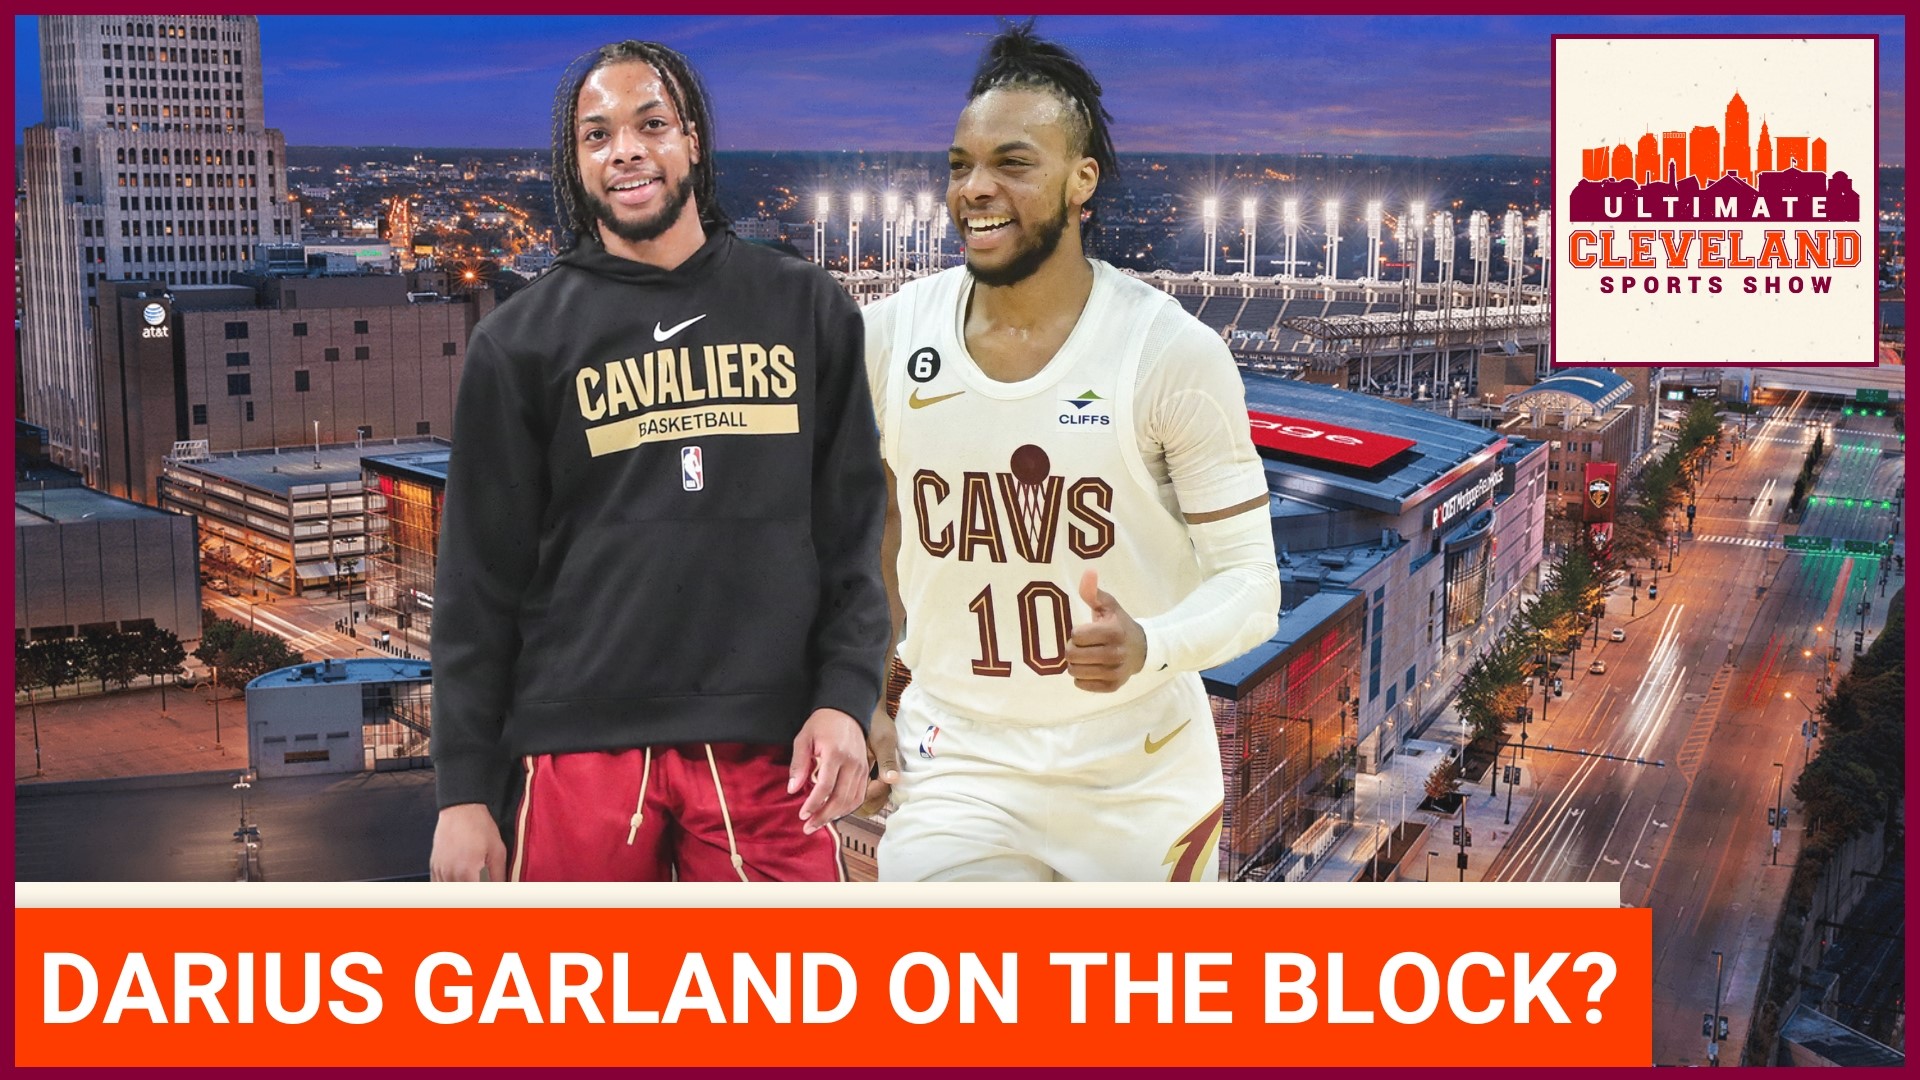 All about the fit: The story behind the Cleveland Cavaliers